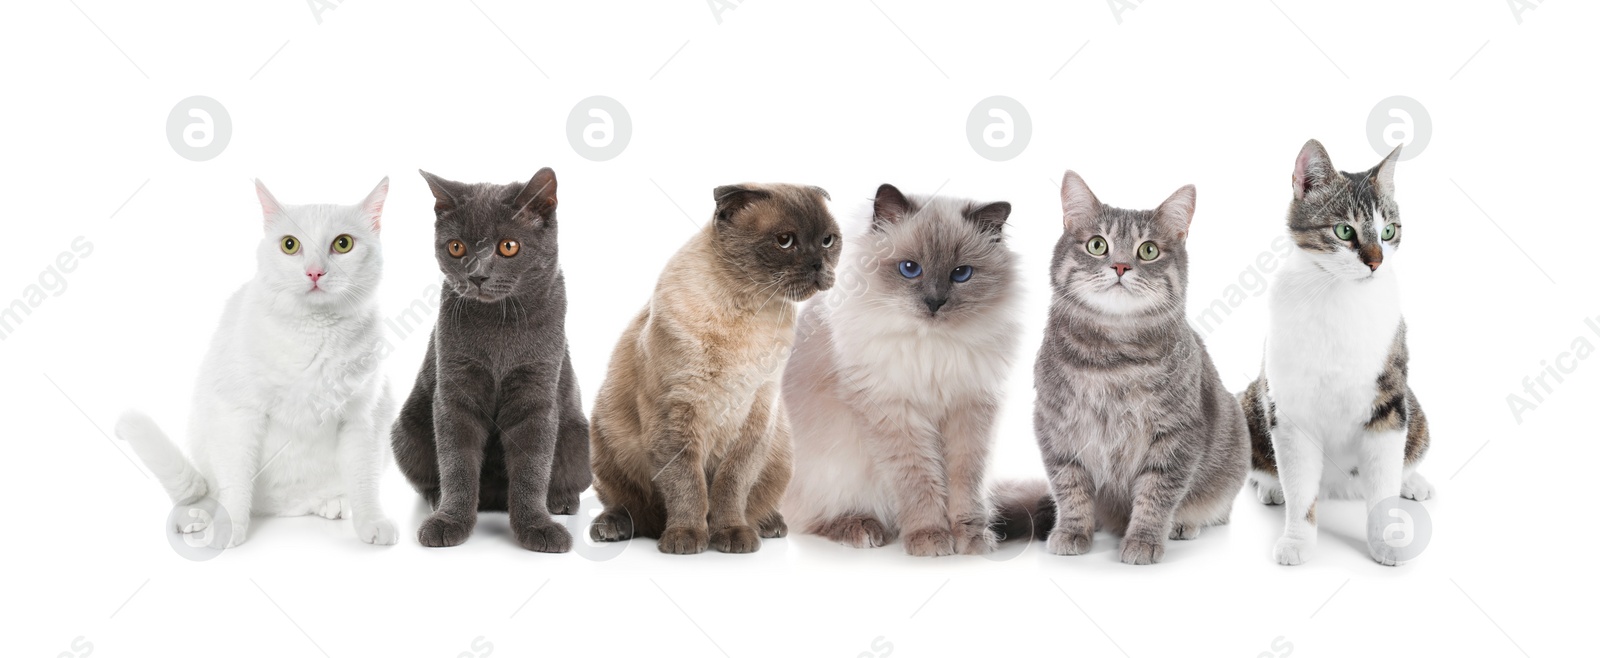 Image of Adorable cats on white background. Banner design